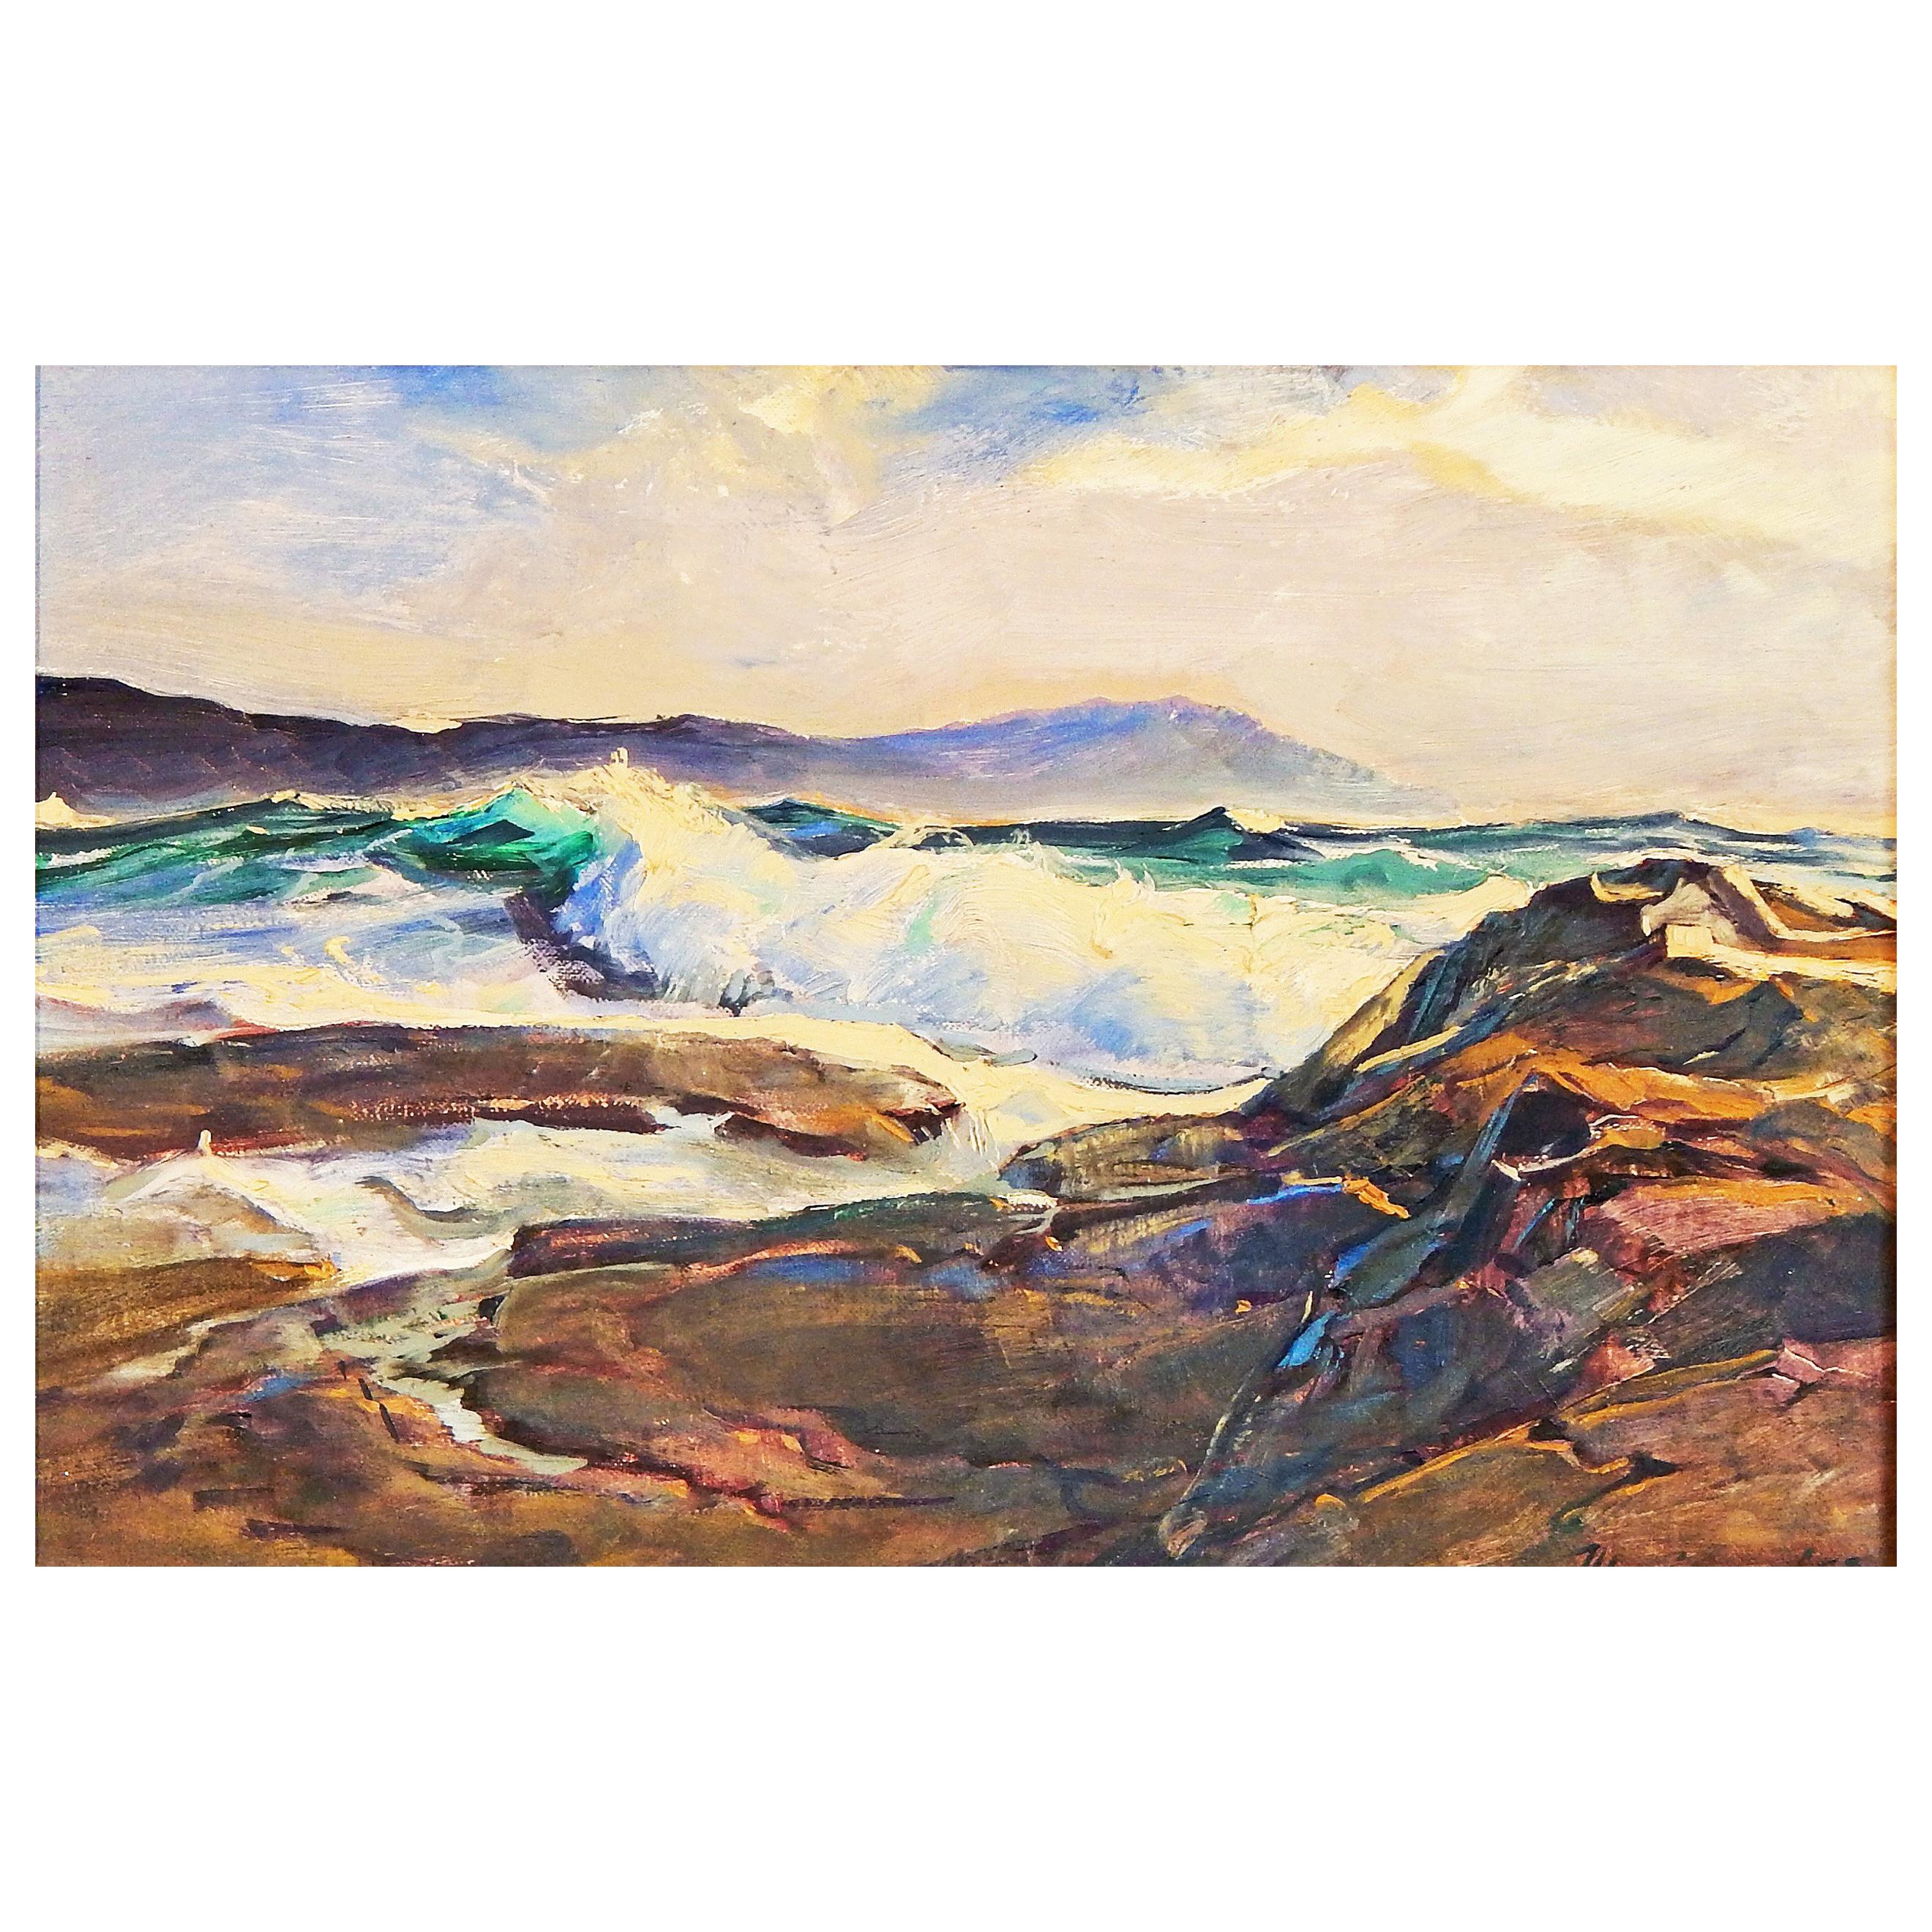 "Seascape" by Armand Merizon, Michigan Artist, in Blue, White and Burnt Sienna